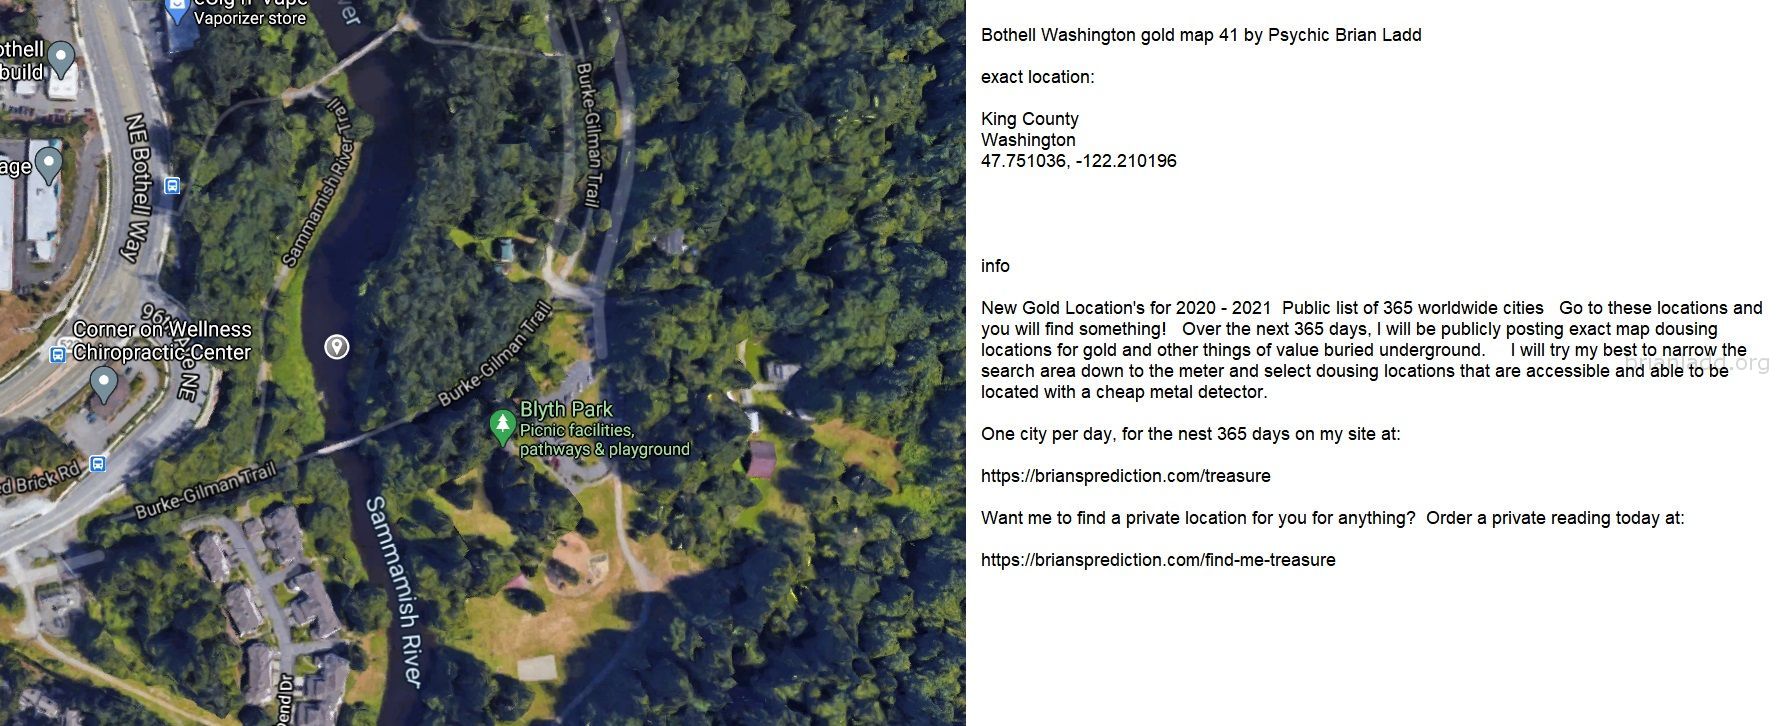 Bothell Washington Gold Map 41 By Psychic Brian Ladd - Bothell Washington Gold Map 41 By Psychic Brian Ladd  Exact Locat...
Bothell Washington Gold Map 41 By Psychic Brian Ladd  Exact Location:  King County  Washington  47.751036, -122.210196  Info  New Gold Location'S For 2020 - 2021  Public List Of 365 Worldwide Cities  Go To These Locations And You Will Find Something!  Over The Next 365 Days, I Will Be Publicly Posting Exact Map Dousing Locations For Gold And Other Things Of Value Buried Underground.  I Will Try My Best To Narrow The Search Area Down To The Meter And Select Dousing Locations That Are Accessible And Able To Be Located With A Cheap Metal Detector.  One City Per Day, For The Nest 365 Days On My Site At:   https://briansprediction.com/Treasure  Want Me To Find A Private Location For You For Anything?  Order A Private Reading Today At:   https://briansprediction.com/Find-Me-Treasure
